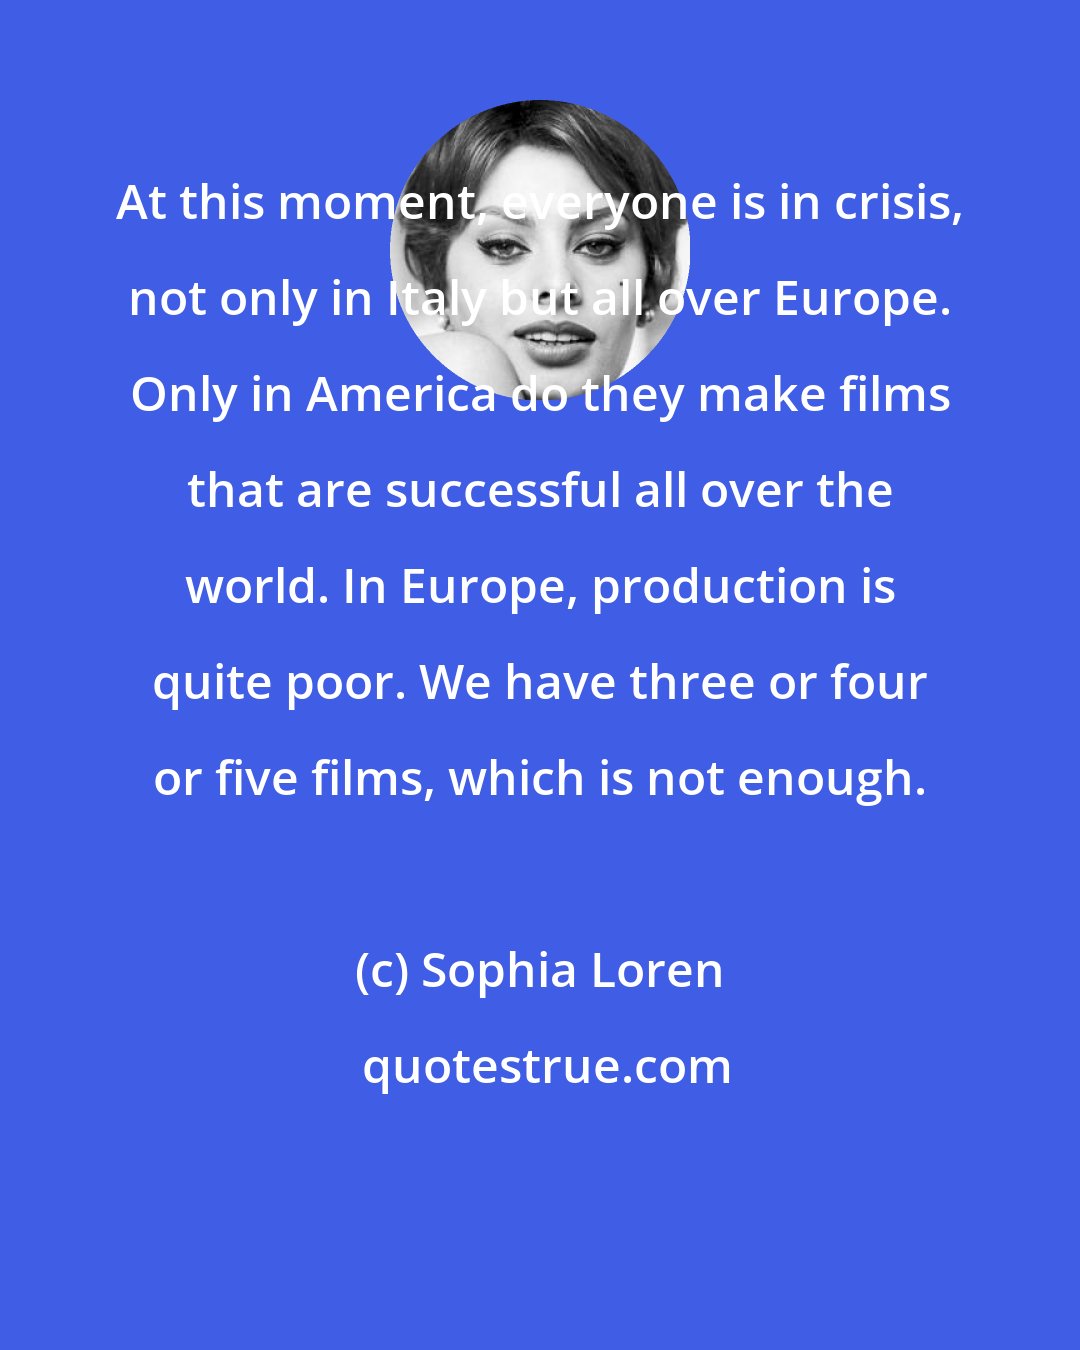 Sophia Loren: At this moment, everyone is in crisis, not only in Italy but all over Europe. Only in America do they make films that are successful all over the world. In Europe, production is quite poor. We have three or four or five films, which is not enough.